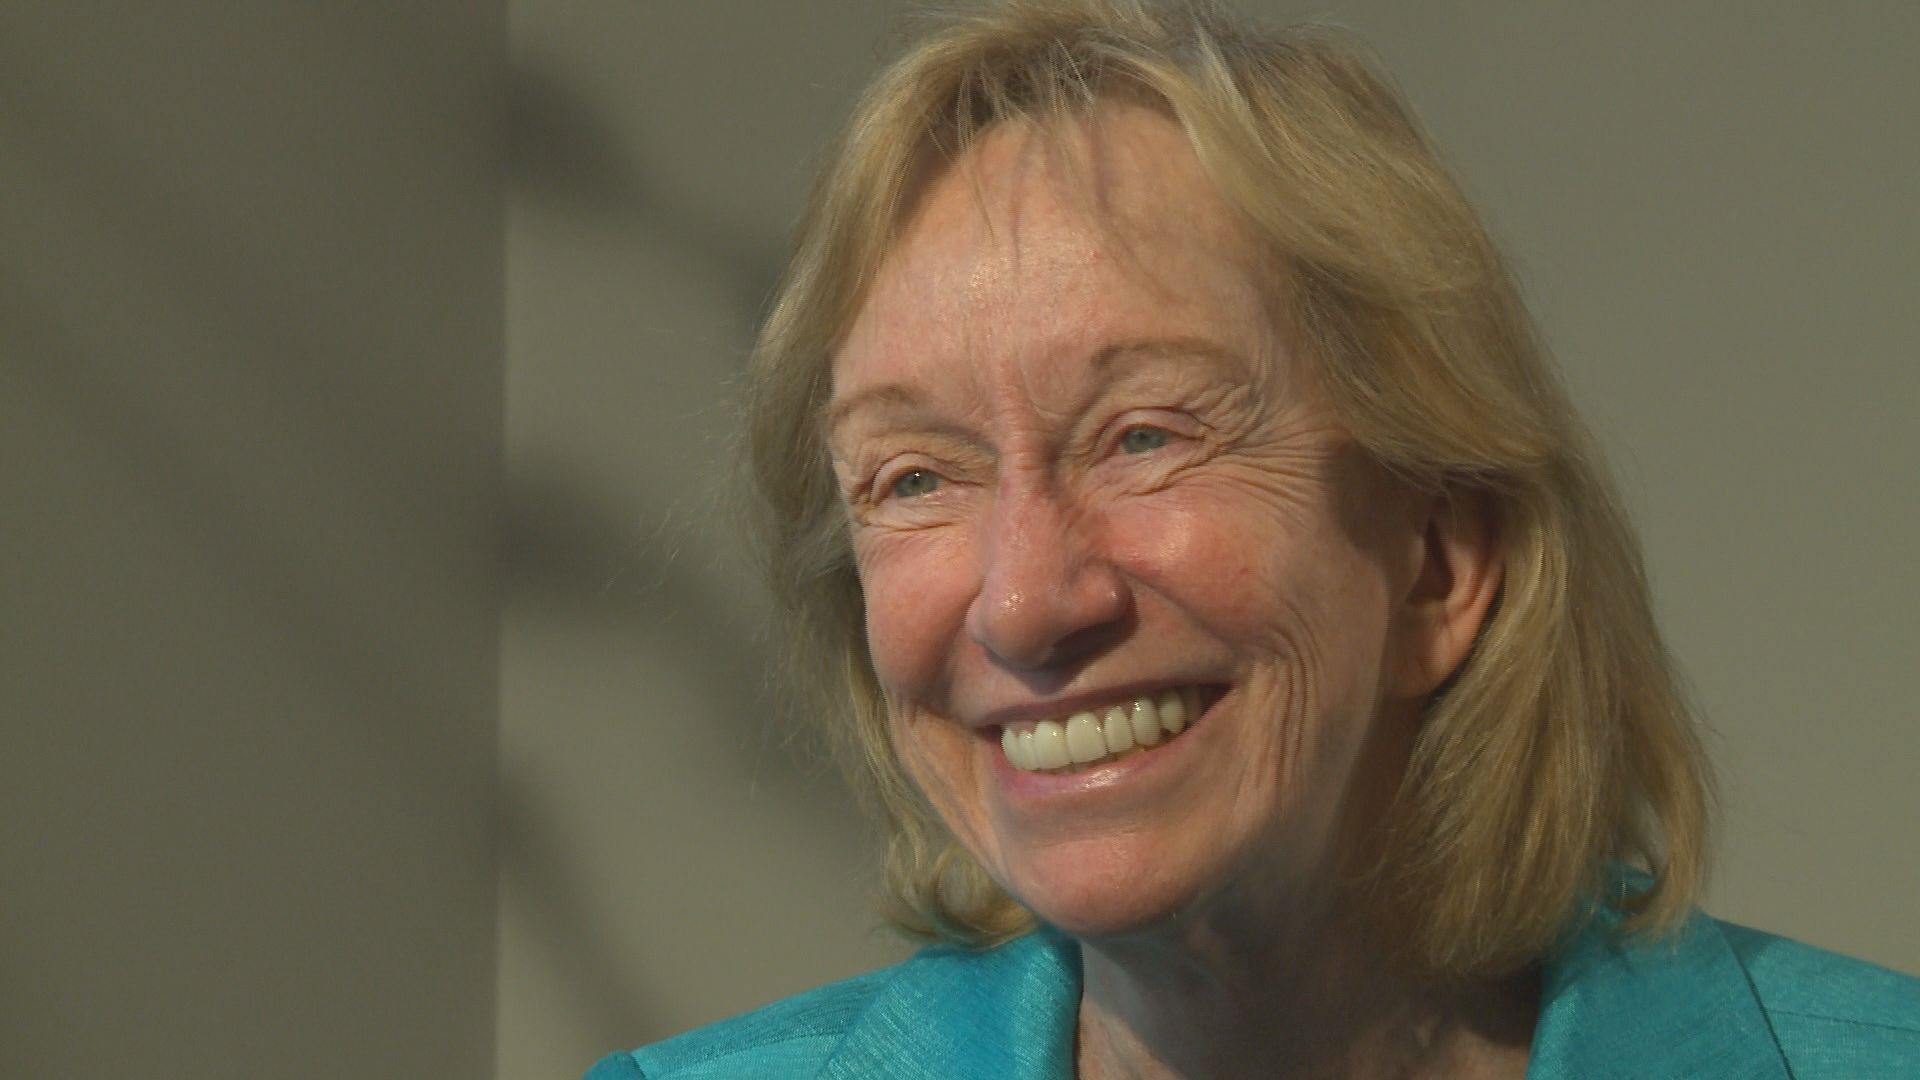 Before writing biographies of Lincoln and Teddy Roosevelt, Doris Kearns Goodwin told Rob Caldwell in 2012 how she experienced history inside the LBJ administration.